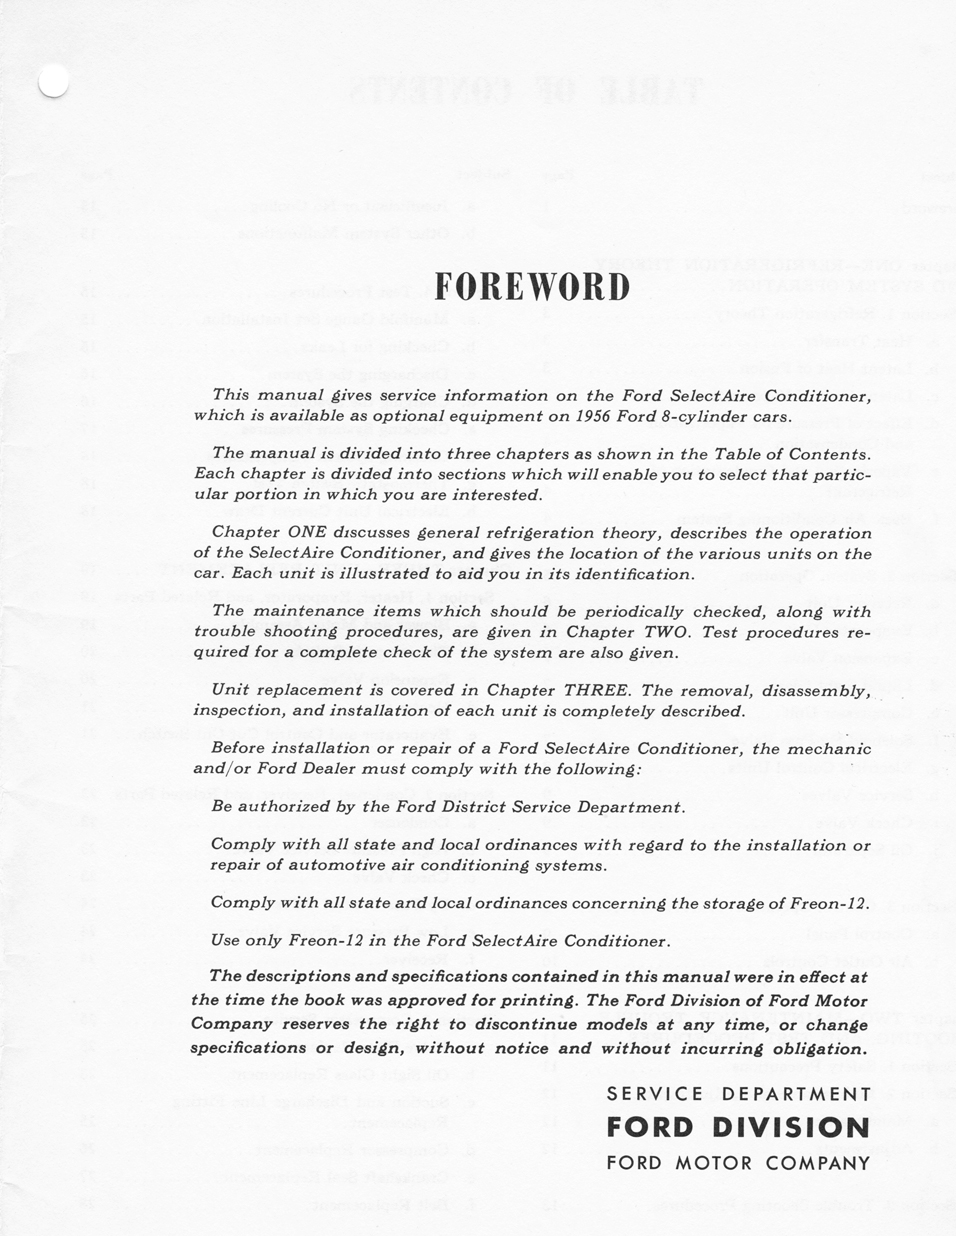 1956 Ford Car Air Conditioning Shop Manual  page 1 - "SelectAire Conditioner"